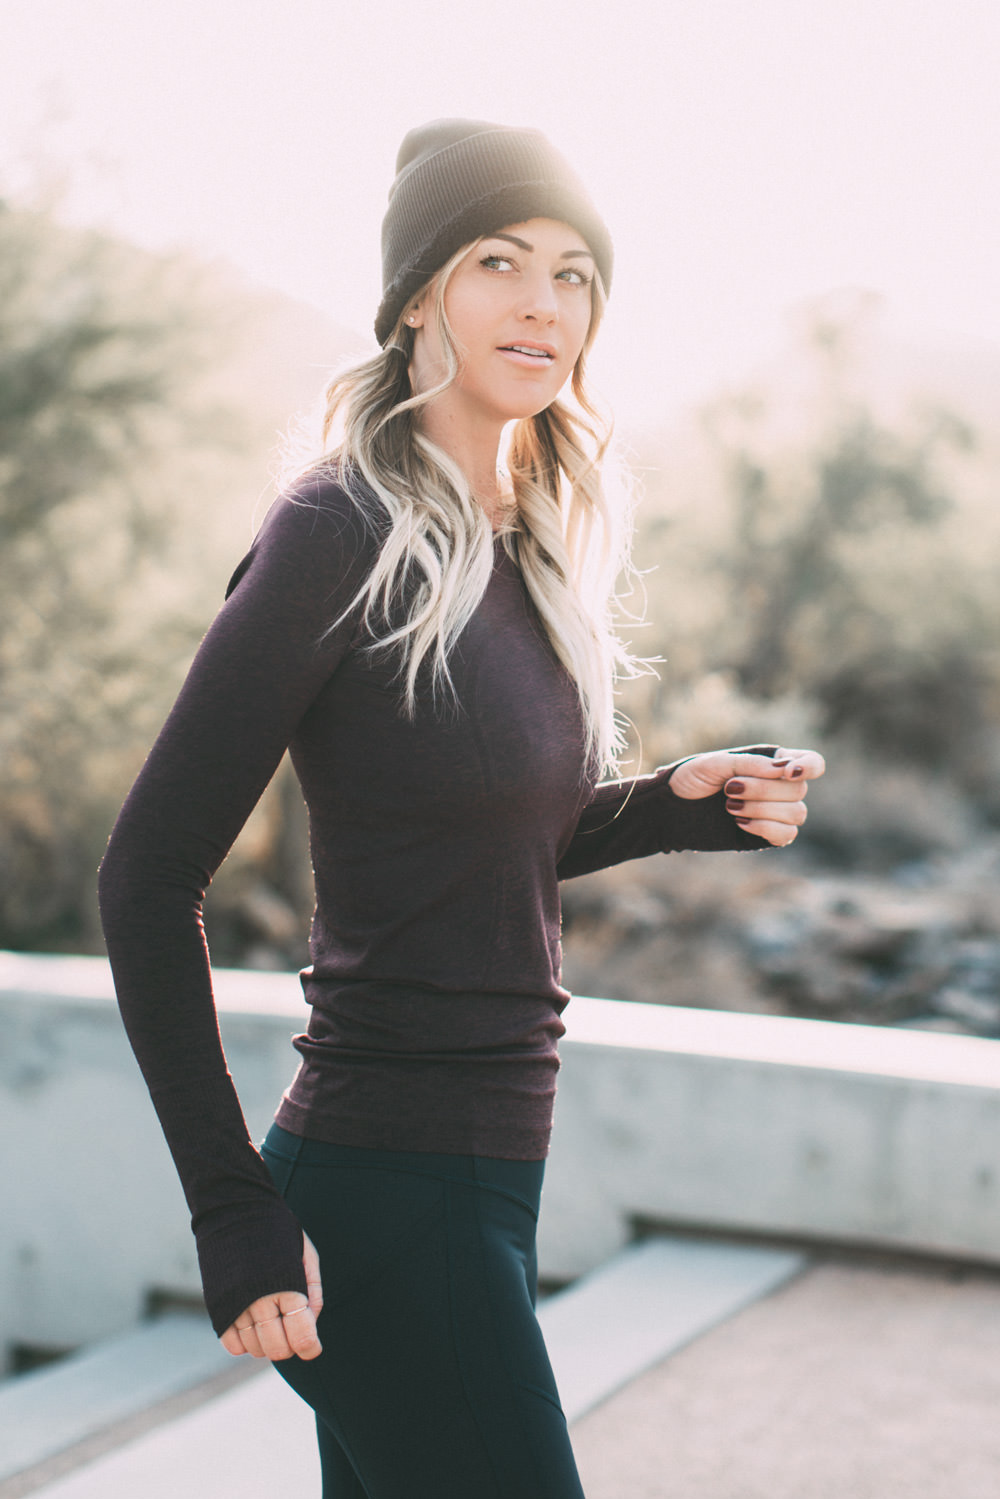 Holiday gift ideas for the health nut and fitness guru from Lululemon by Dash of Darling.